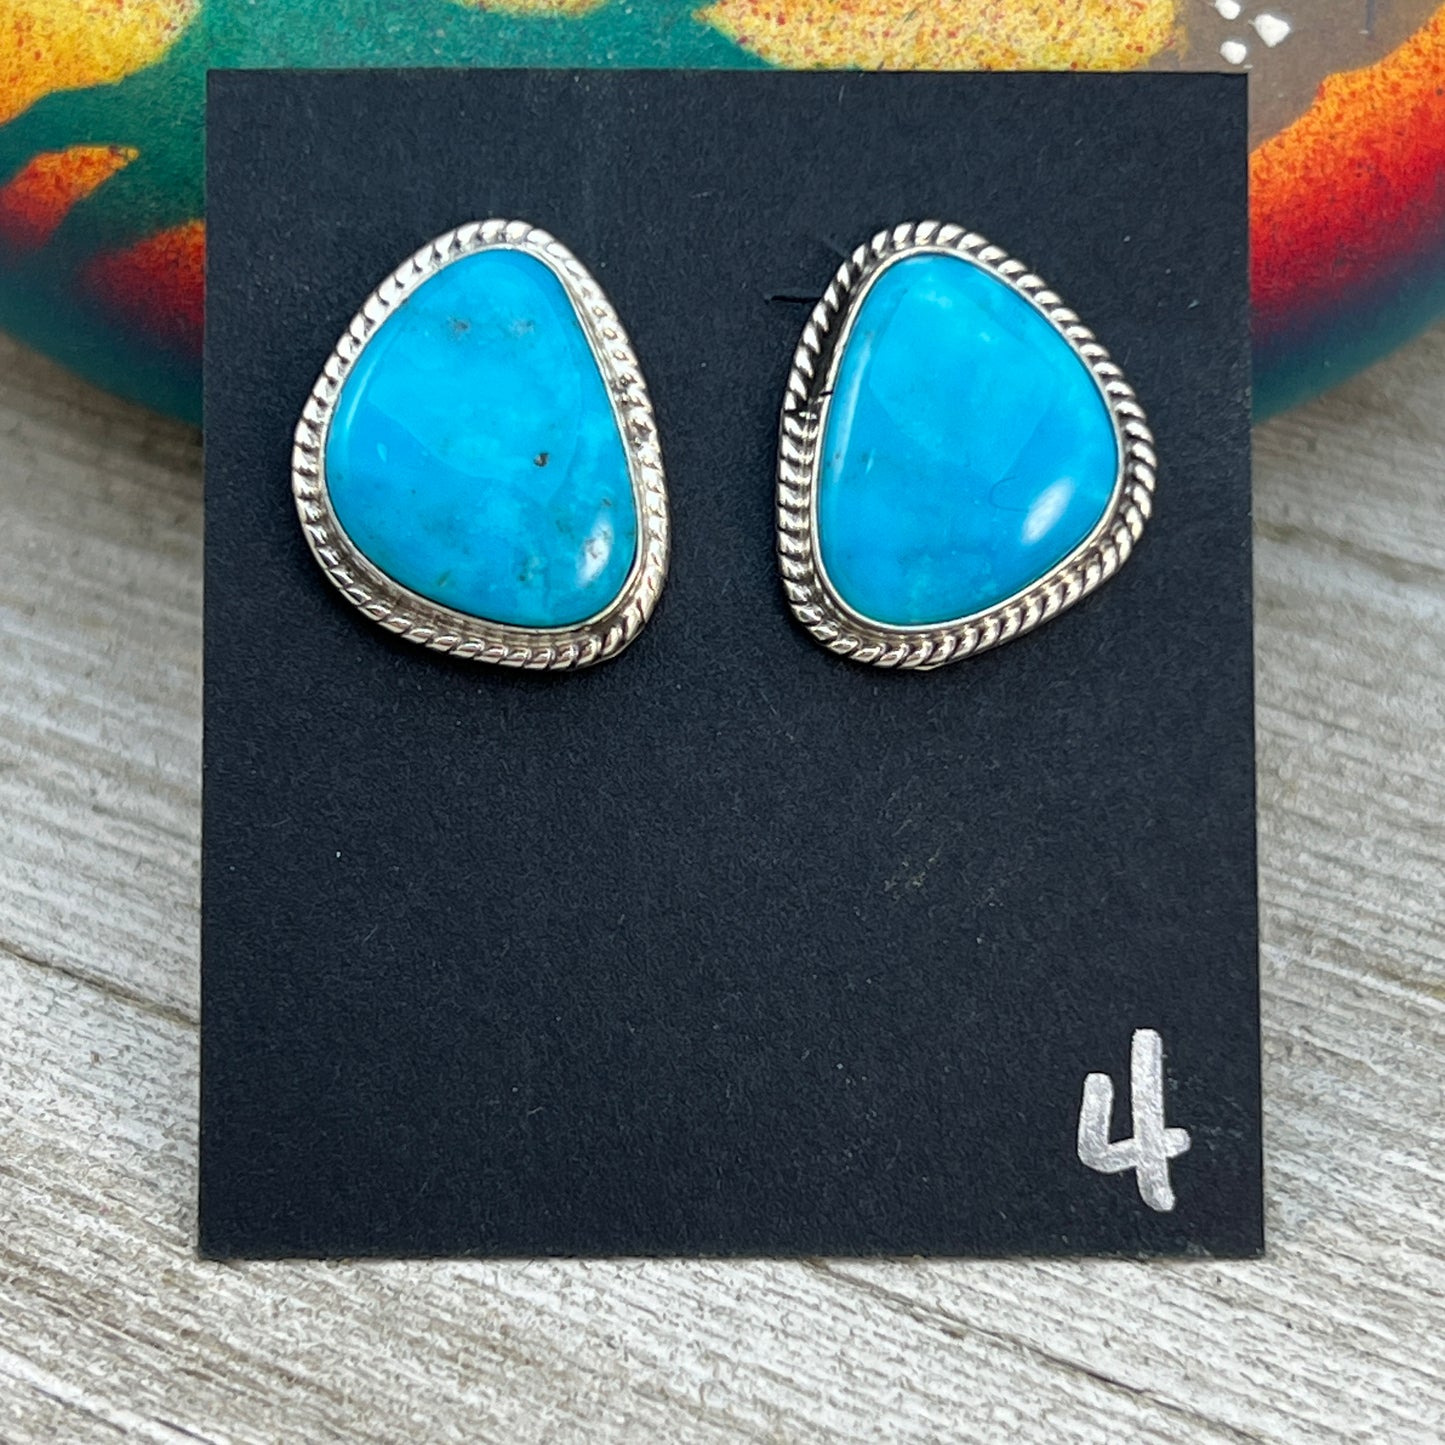 Campitos turquoise, sterling silver, small stud earrings #4, Navajo handmade, Sharon McCarthy